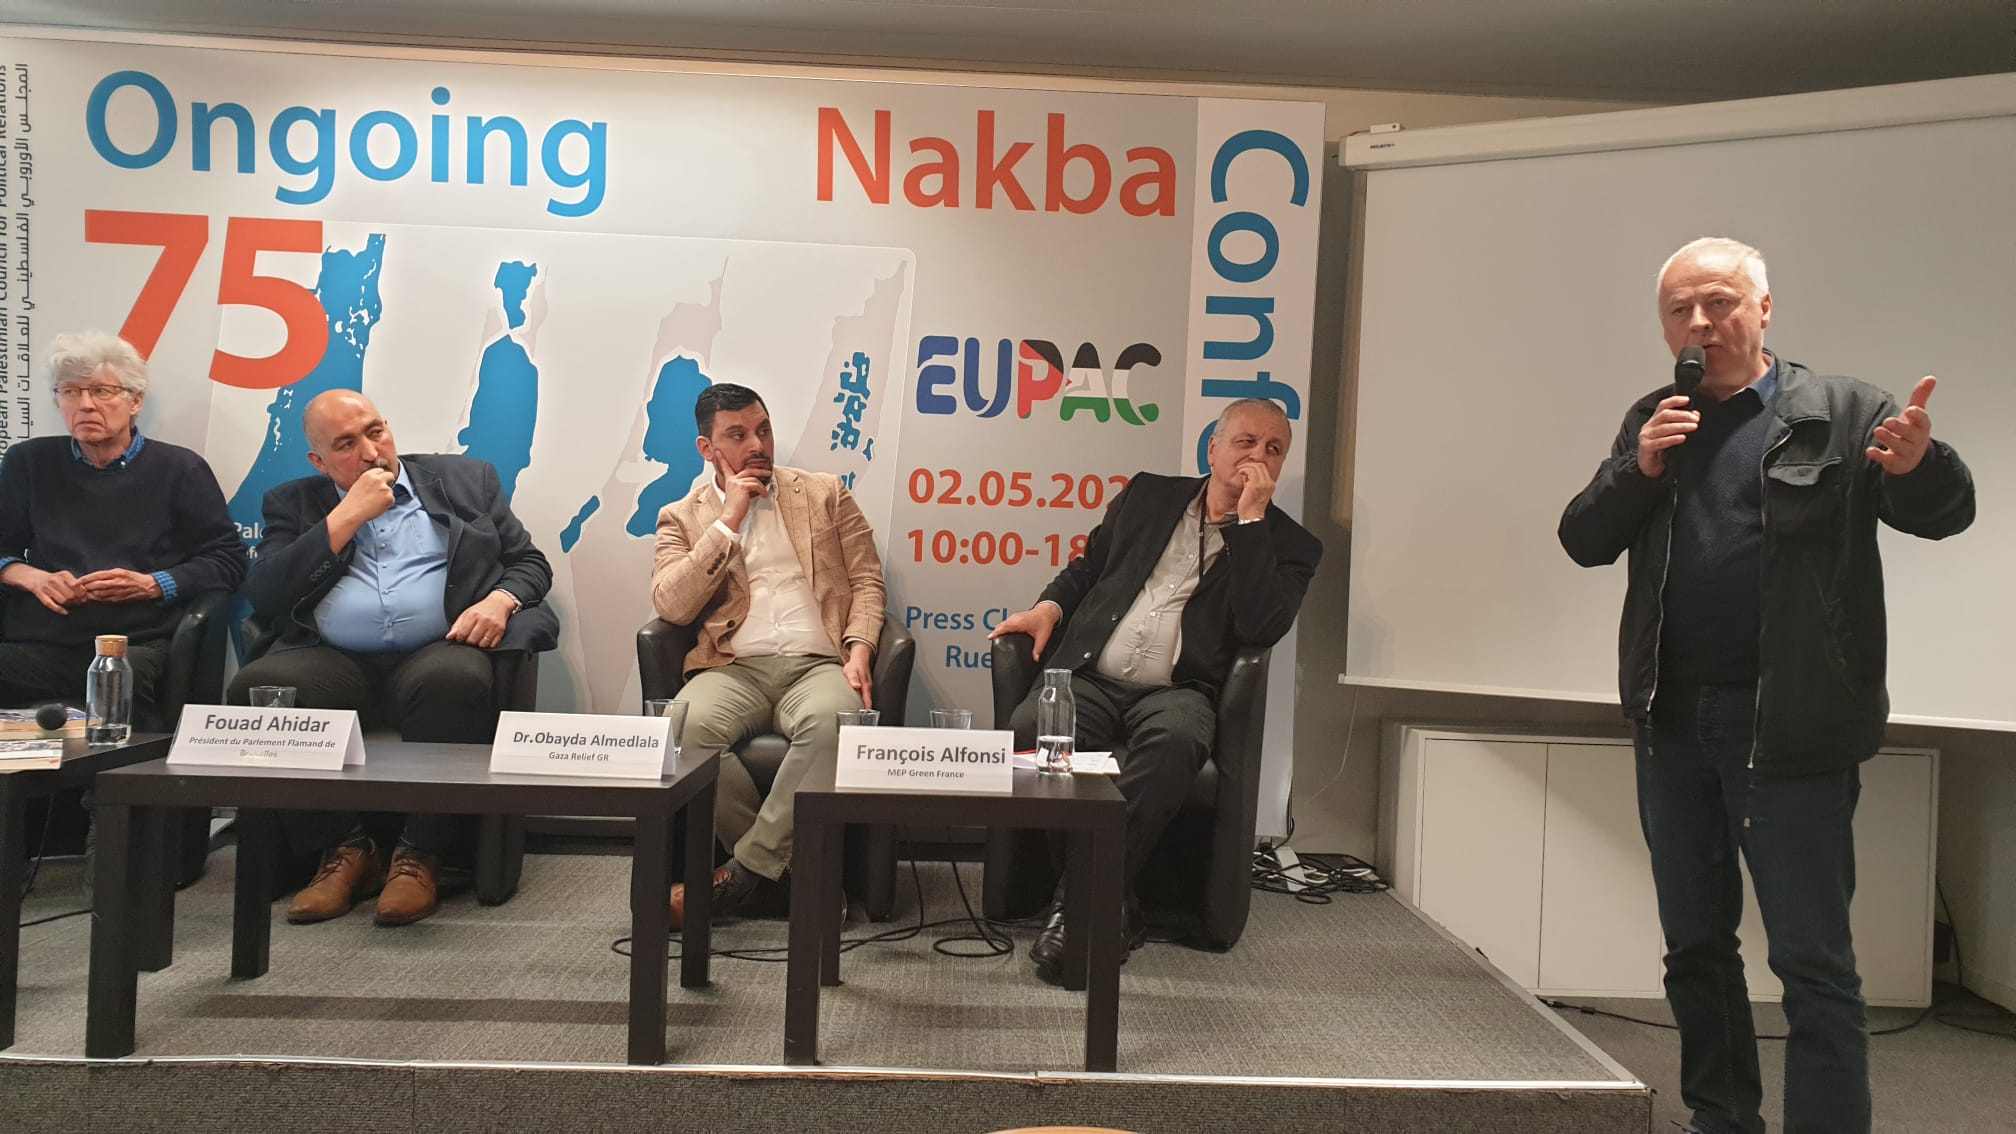 In Nakba's 75th Anniversary, EUPAC Condemns European Support of Israeli Occupation